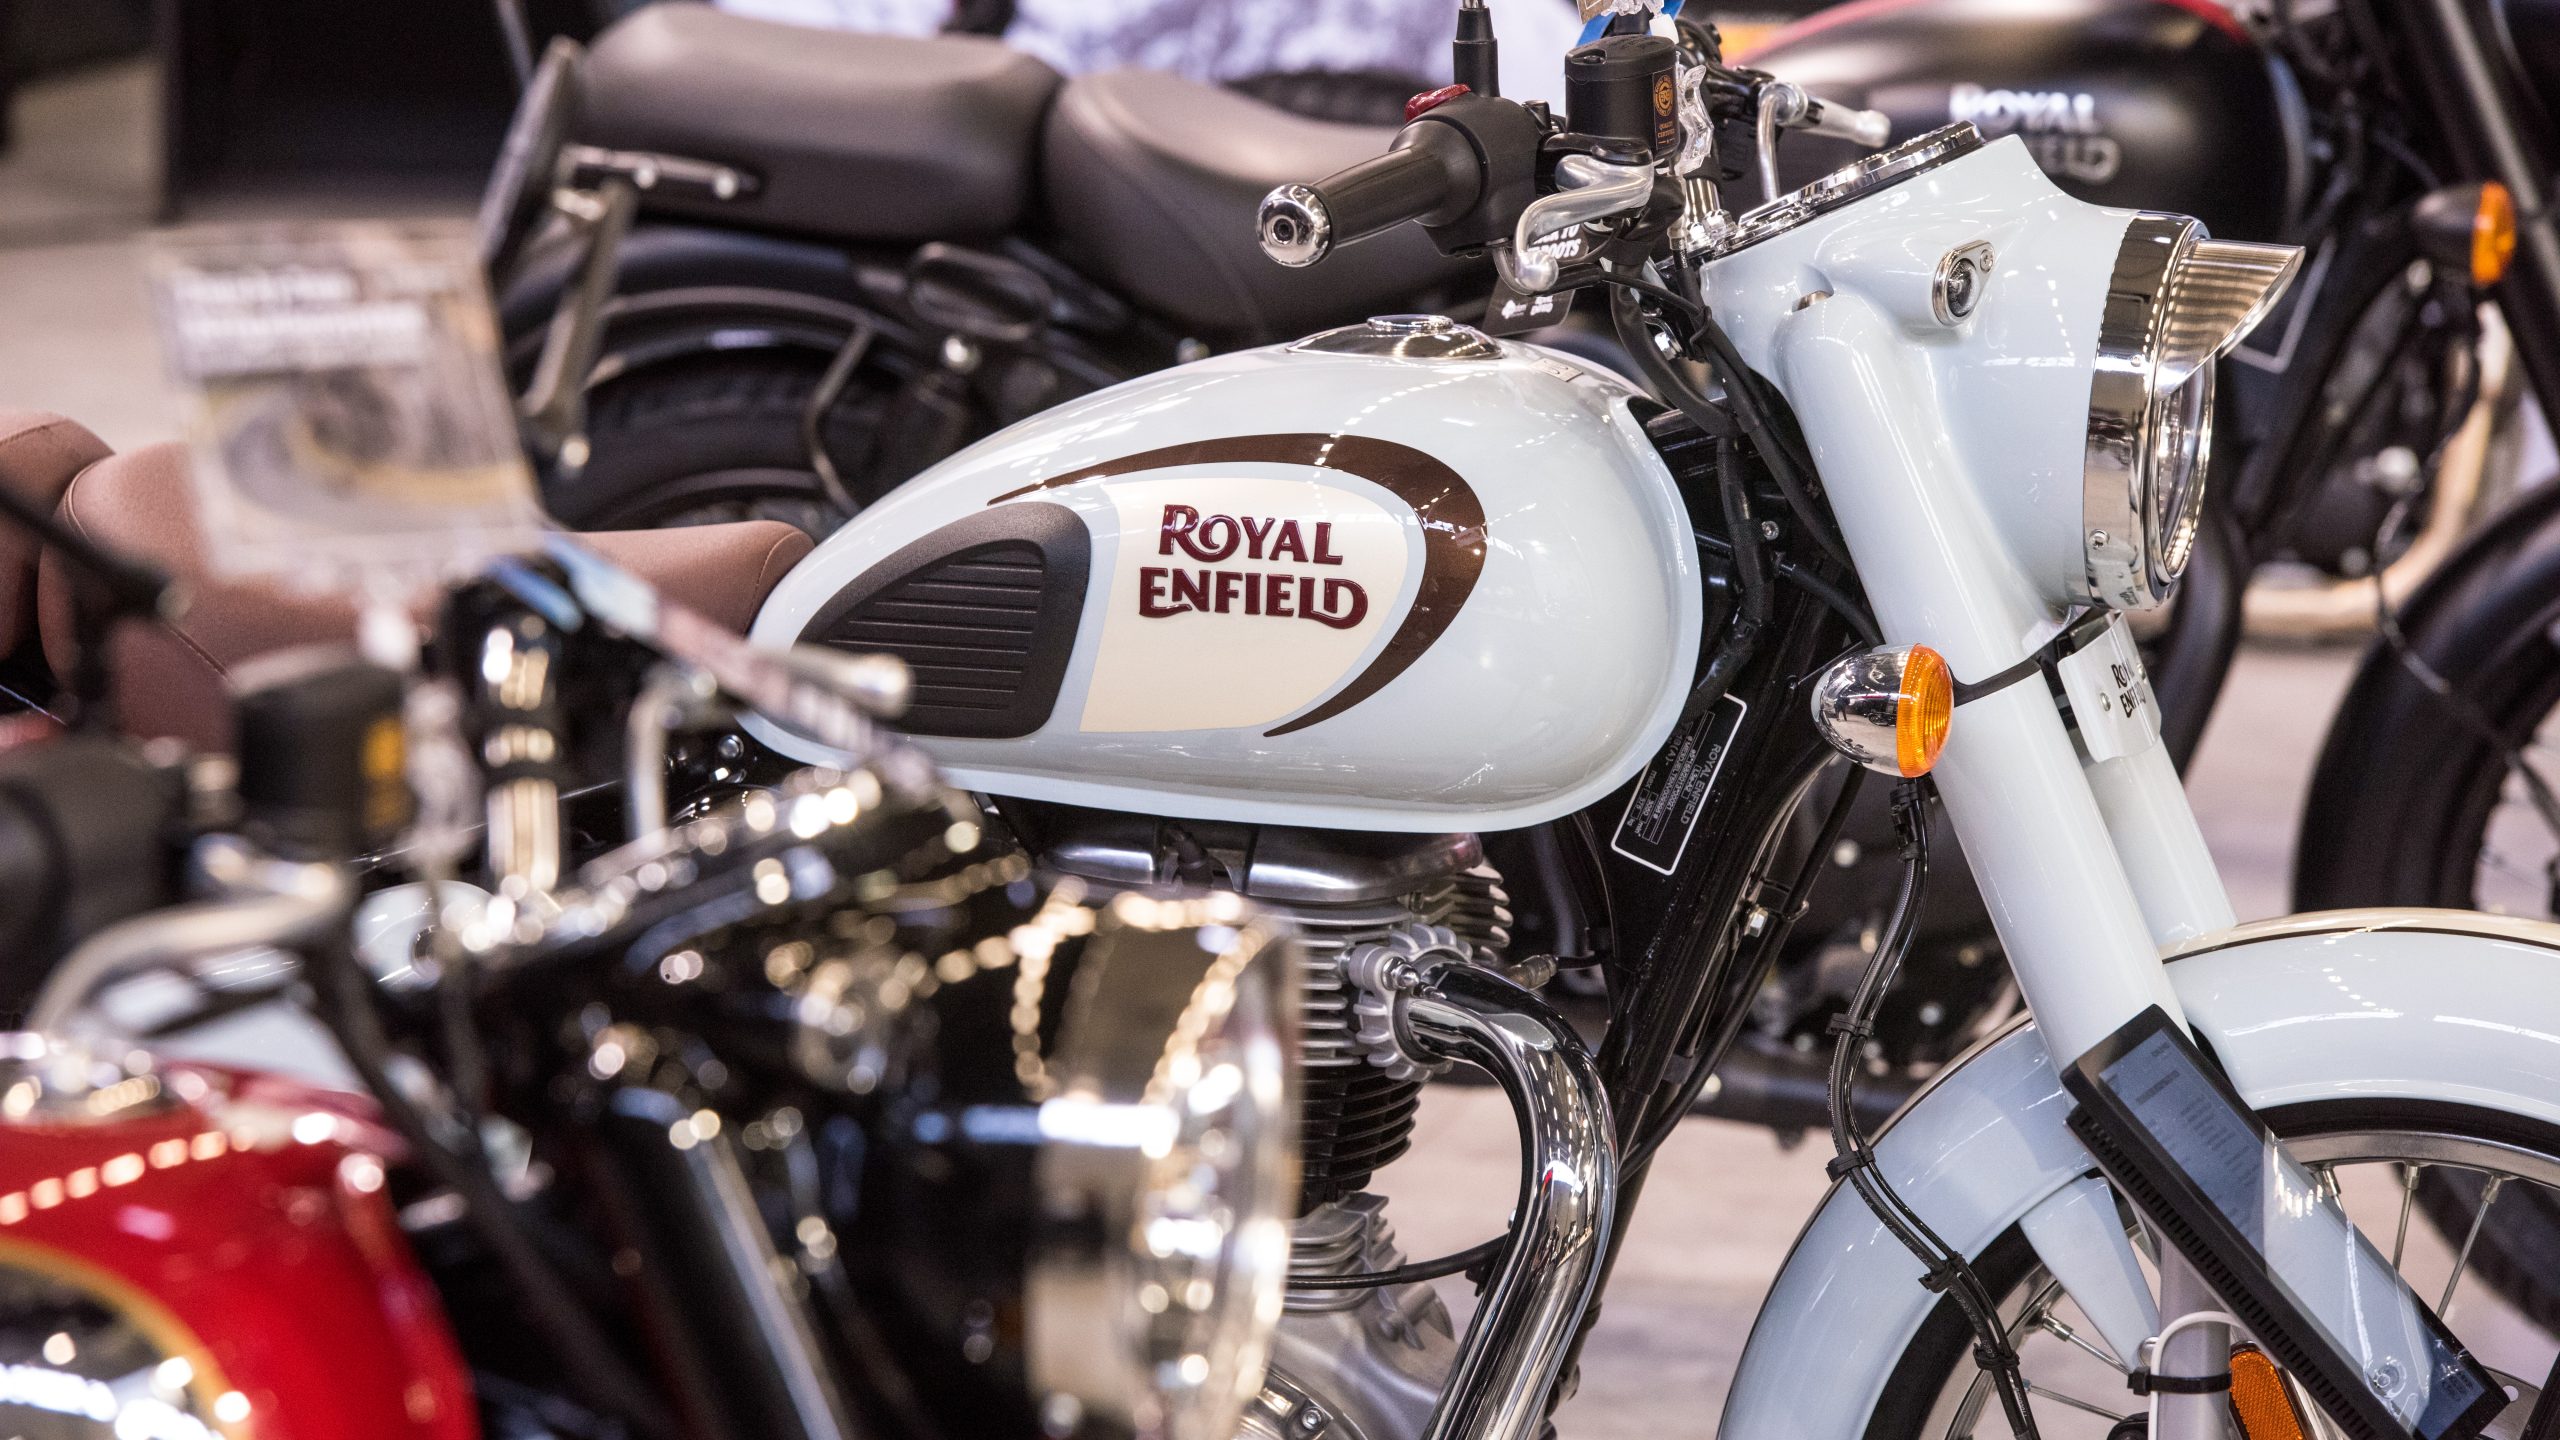 Stand: Royal Enfield, Halle 7